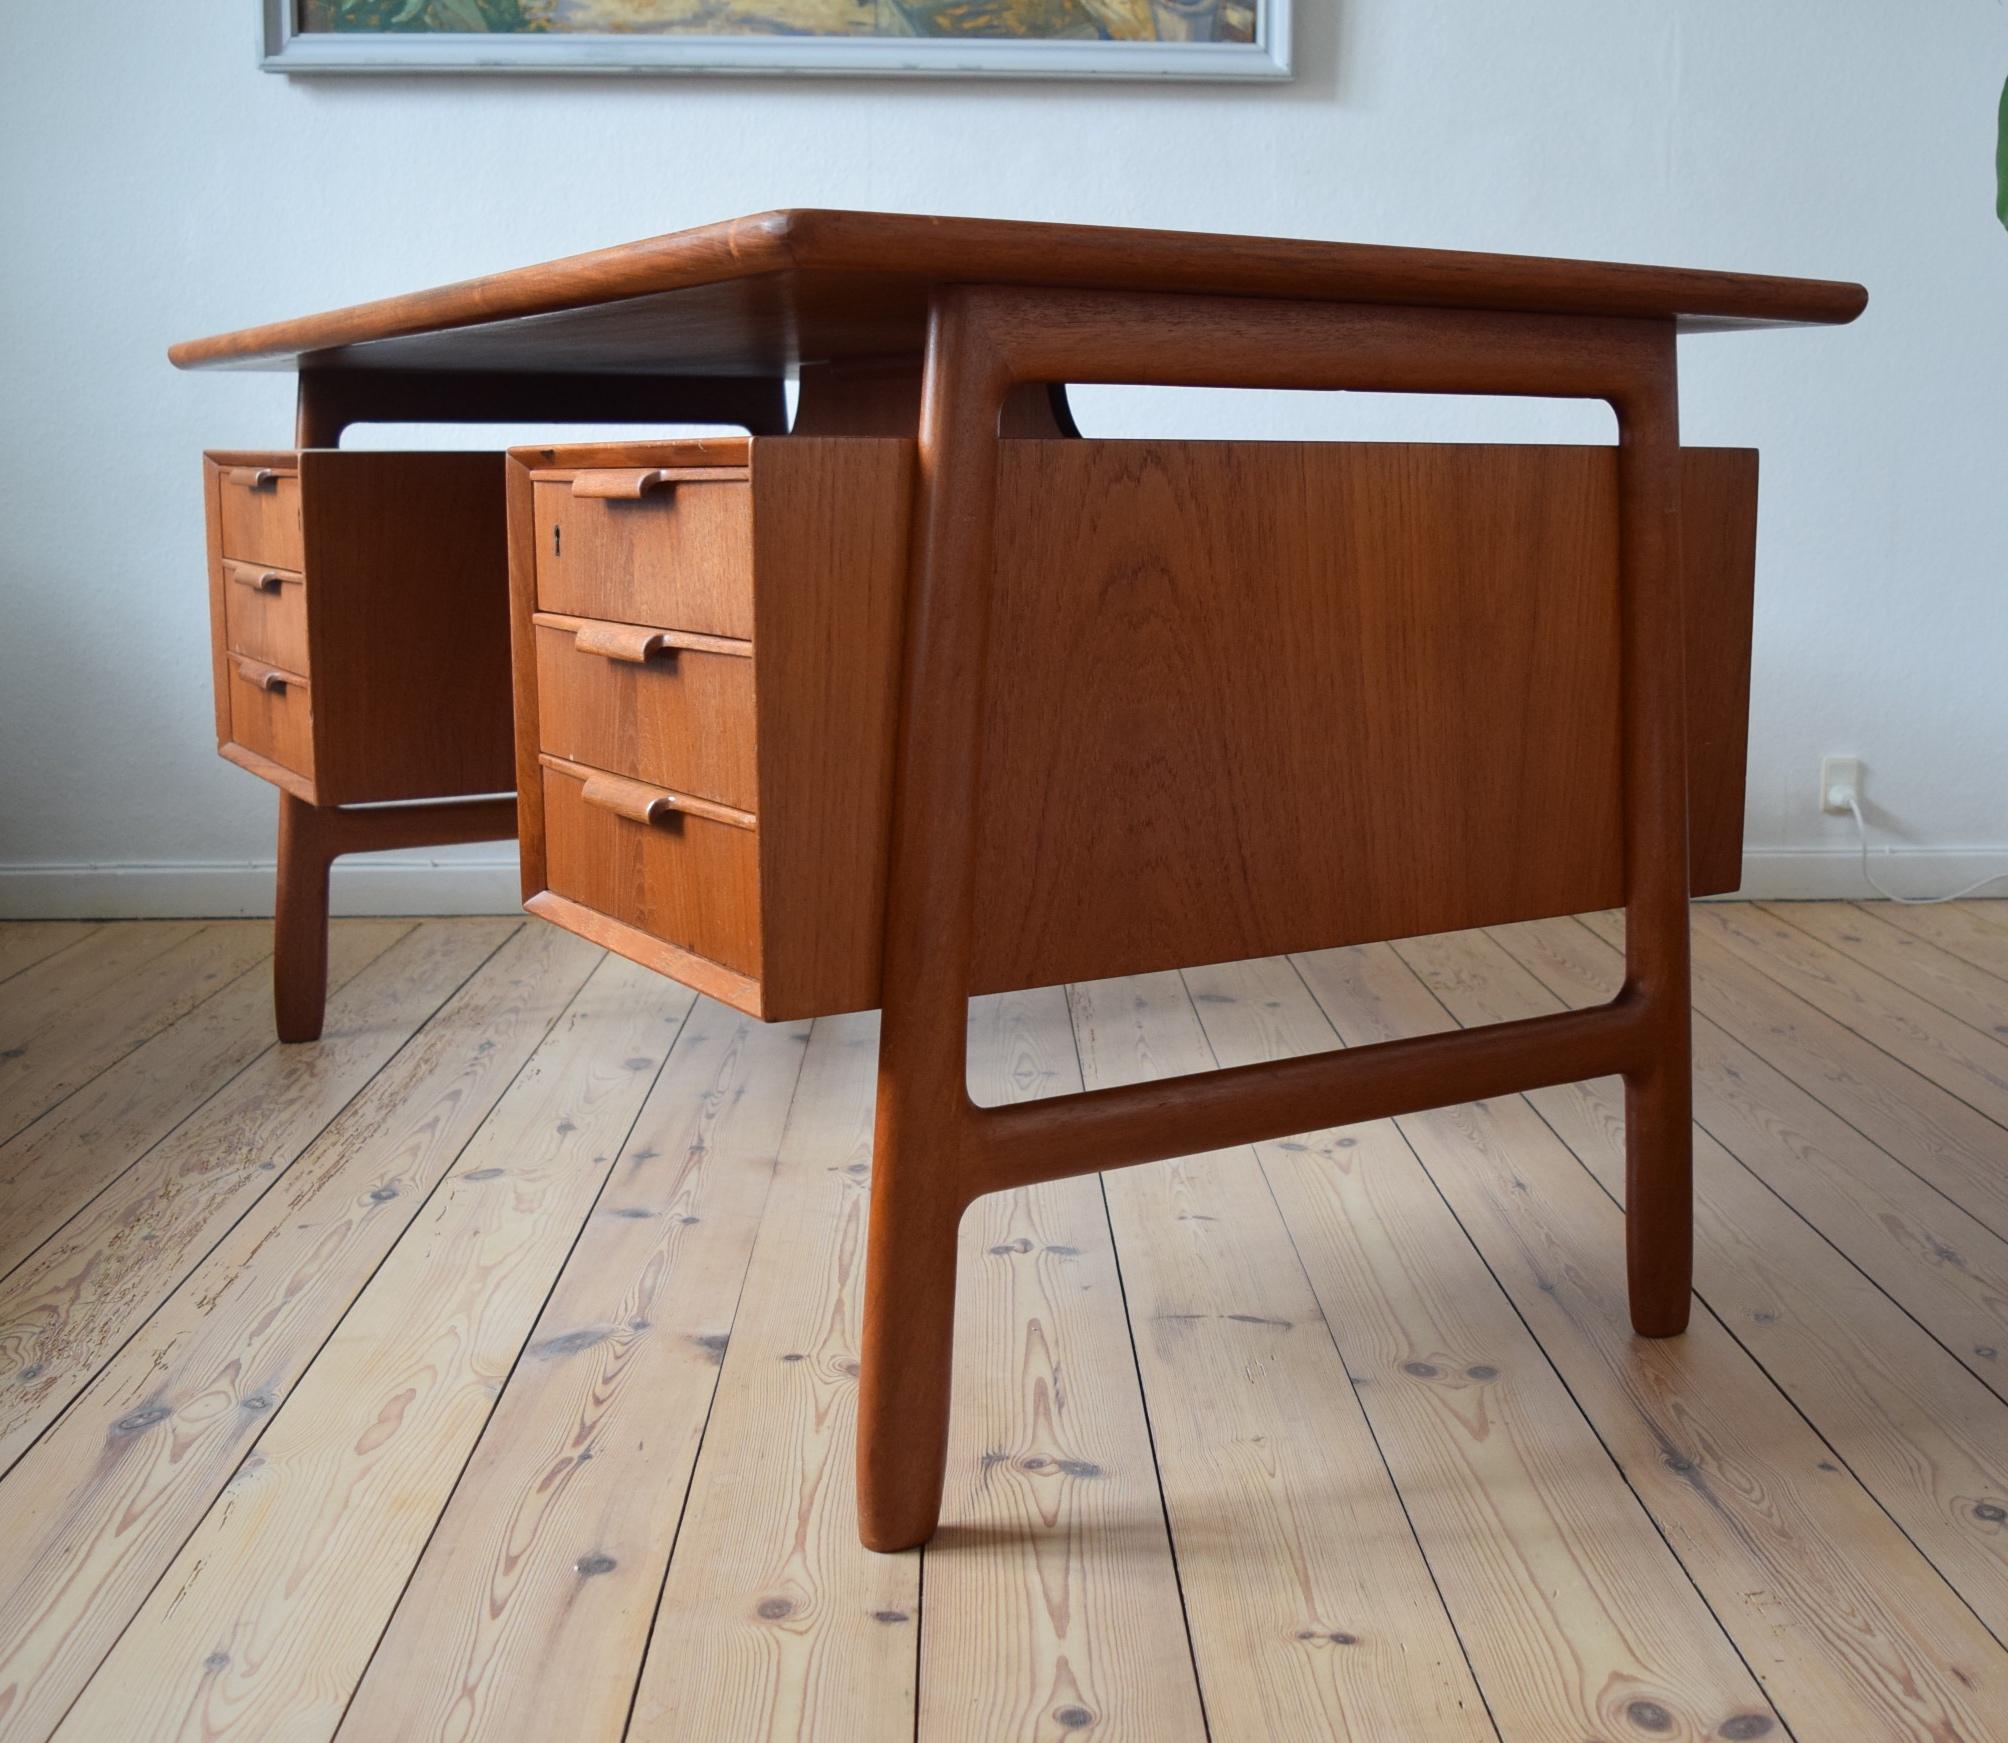 Mid-Century Modern, model 75 executive desk dating from the 1960s. The refinished vintage desk features six drawers with sculpted wood pulls. Additional storage space is found on the backside with two open bookshelves and a fall-front compartment.